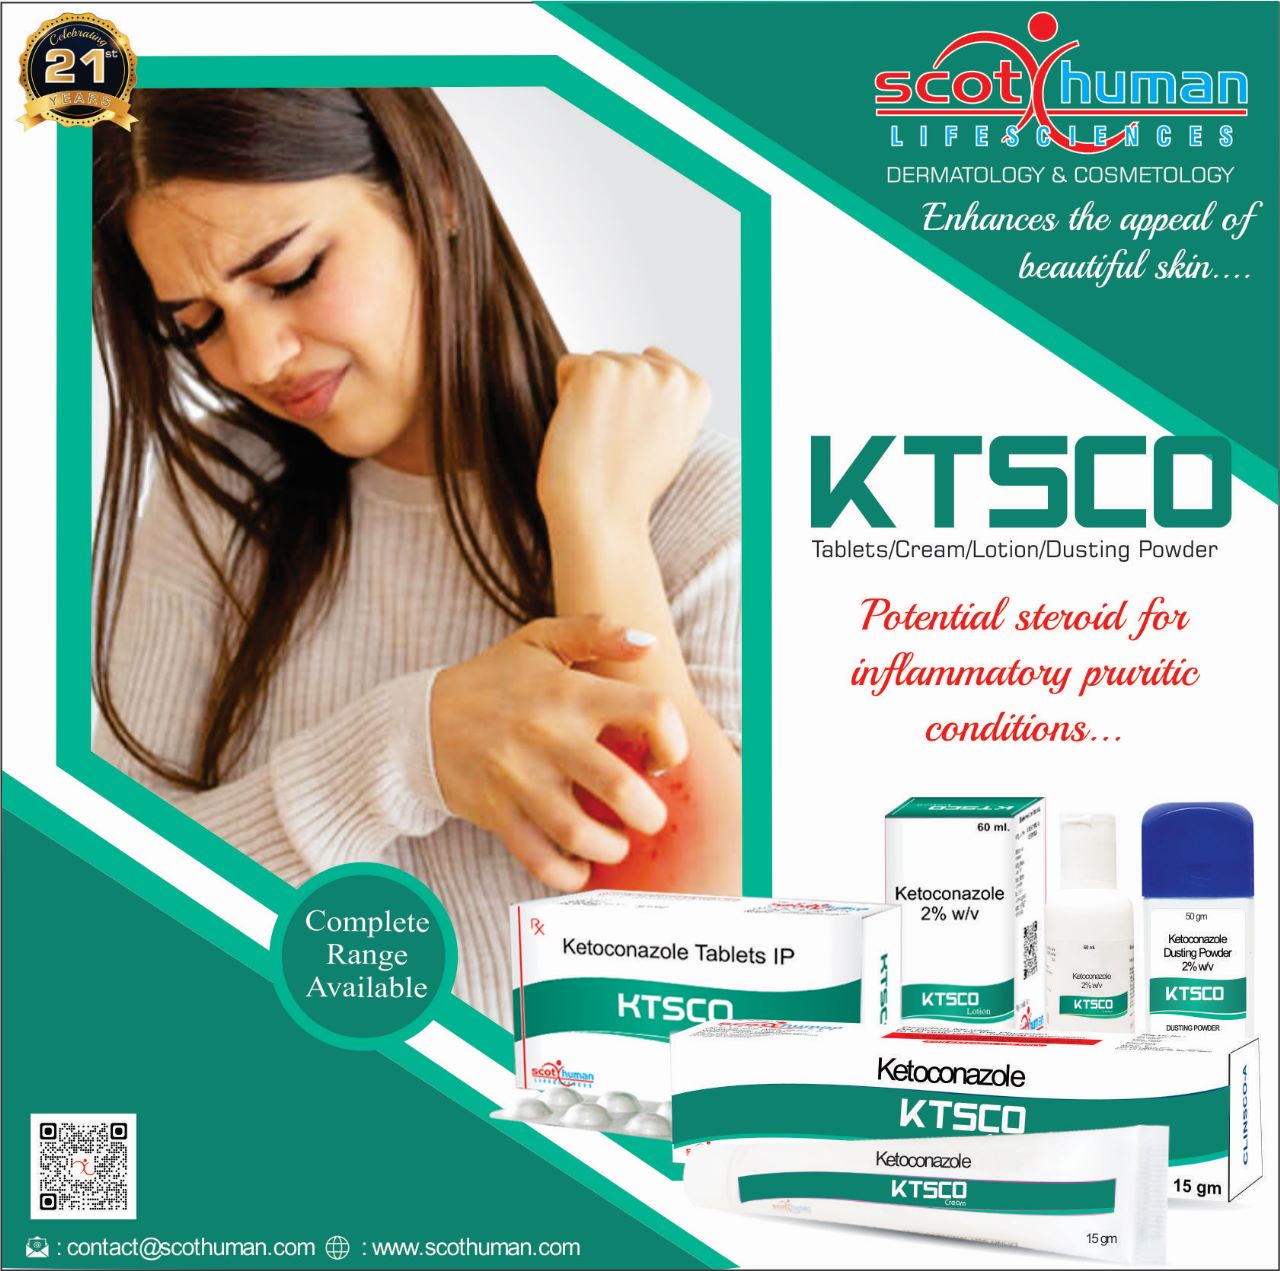 Product Name: Ktsco , Compositions of Ktsco  are ketoconazole Tablets IP - Pharma Drugs and Chemicals